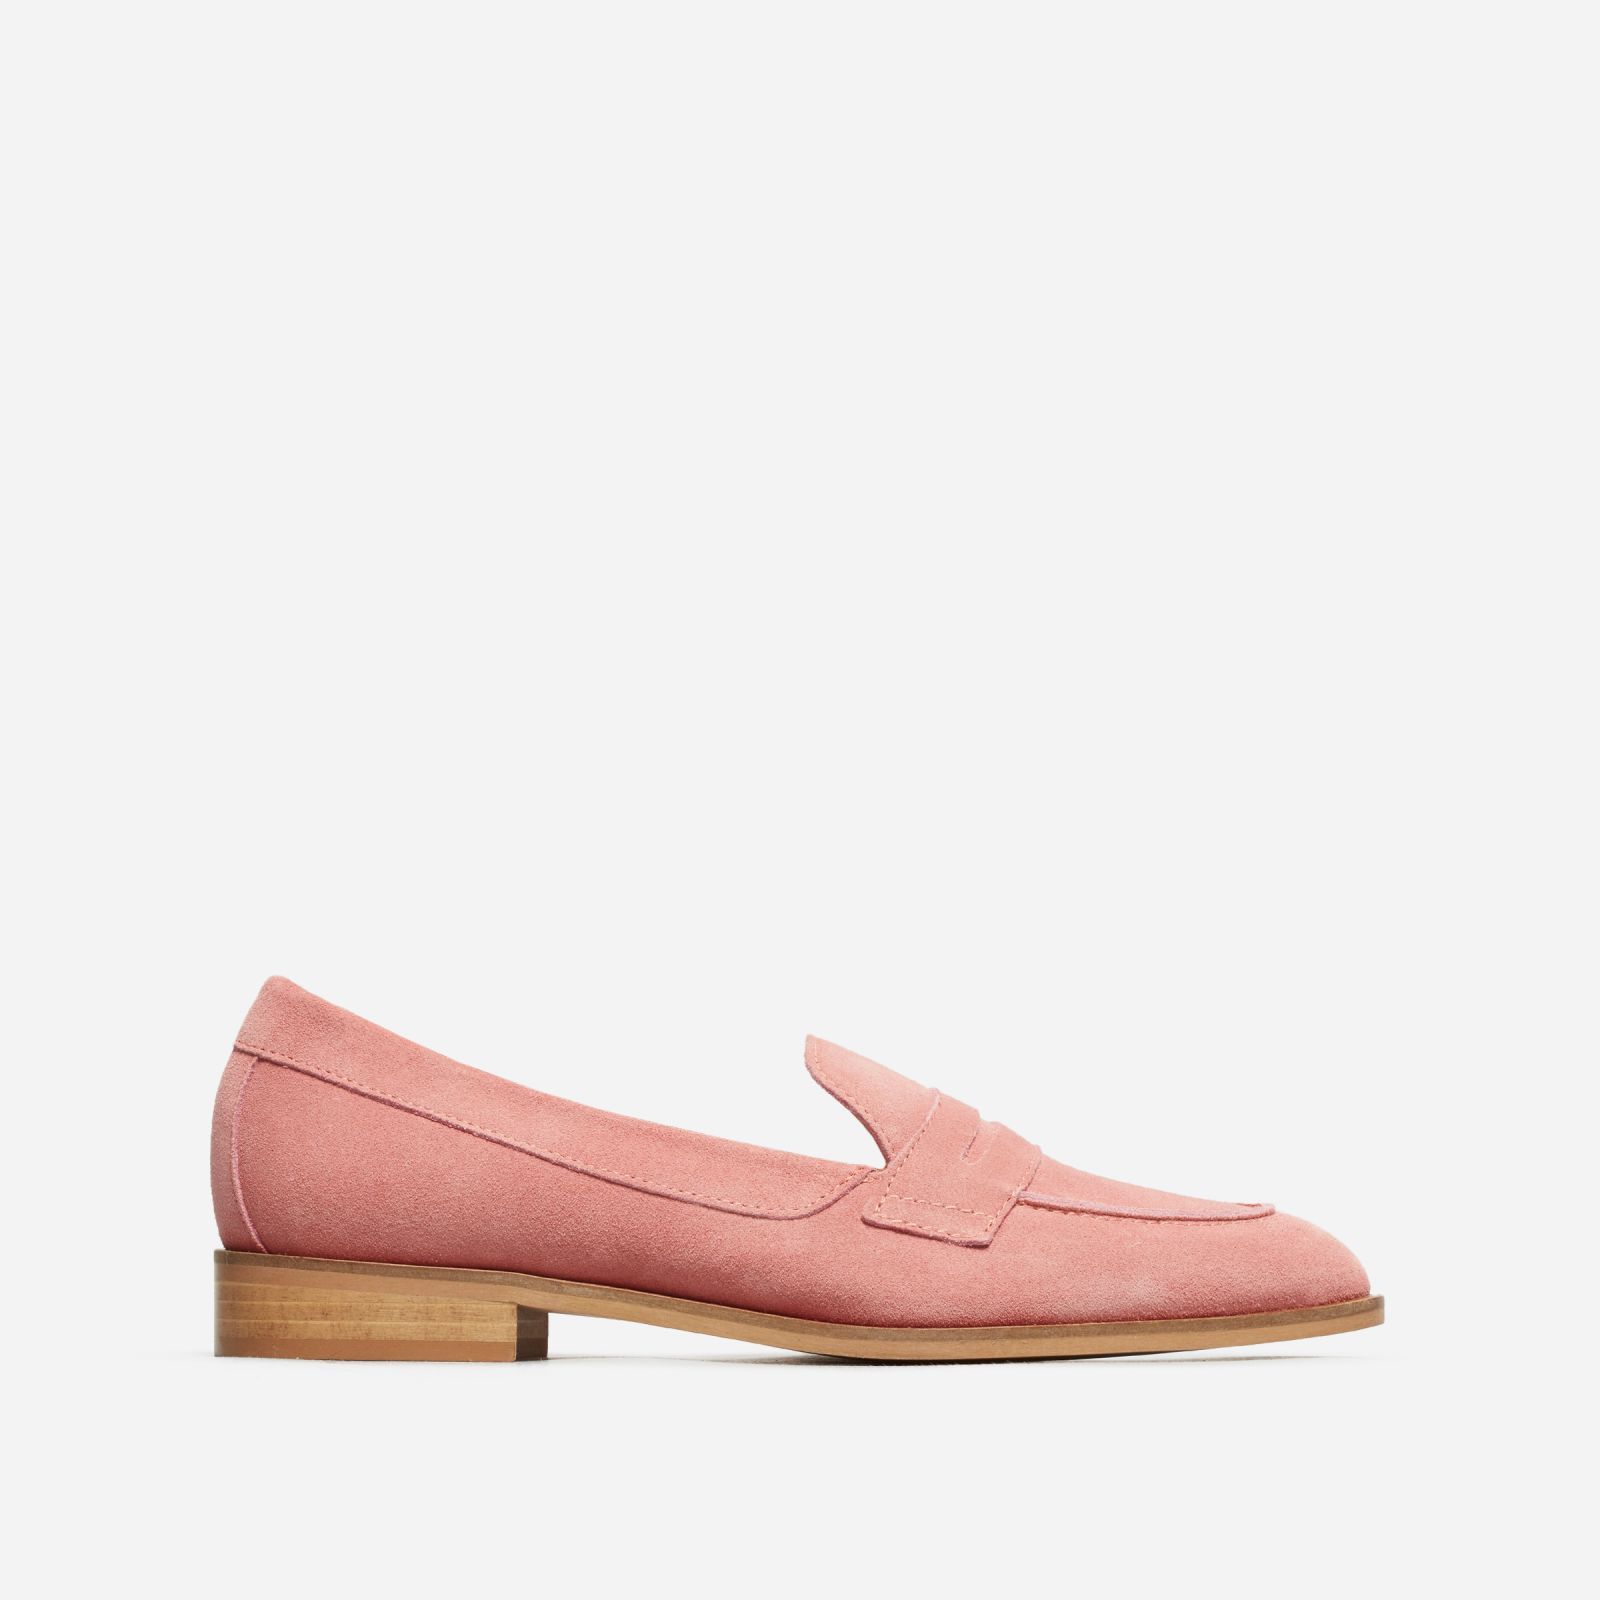 Women's Penny Loafers by Everlane in Rose Suede, Size 5 | Everlane